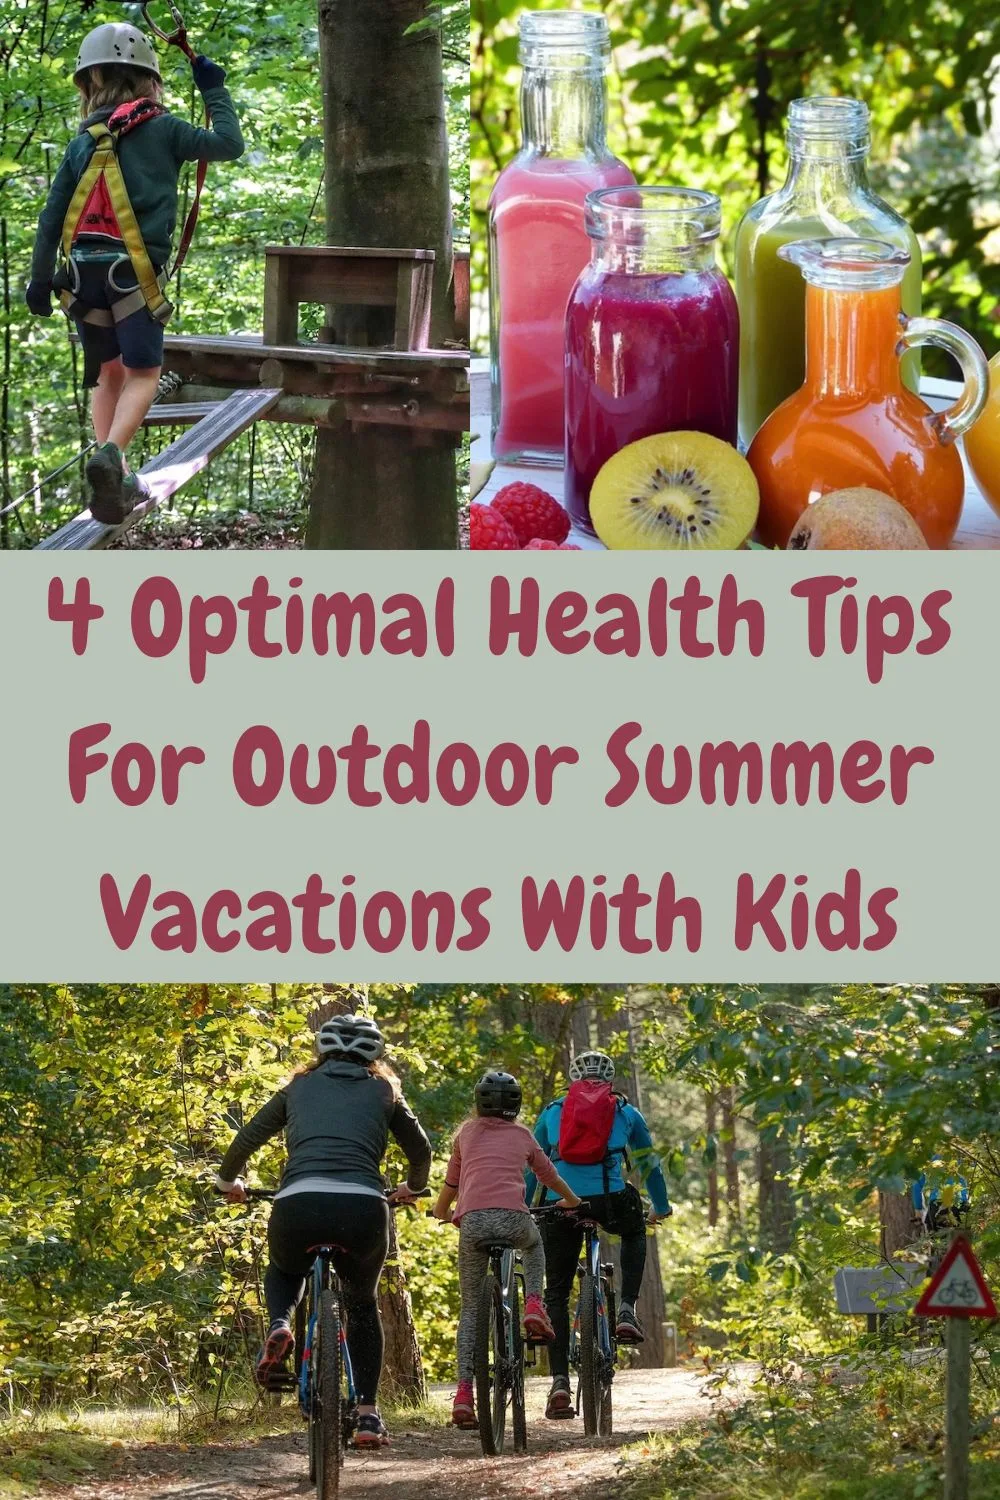 4 tips to protect your kids' health on summer vacations: how to avoid and deal with big bites, allergies, sunburn & more when your family heads outdoors.